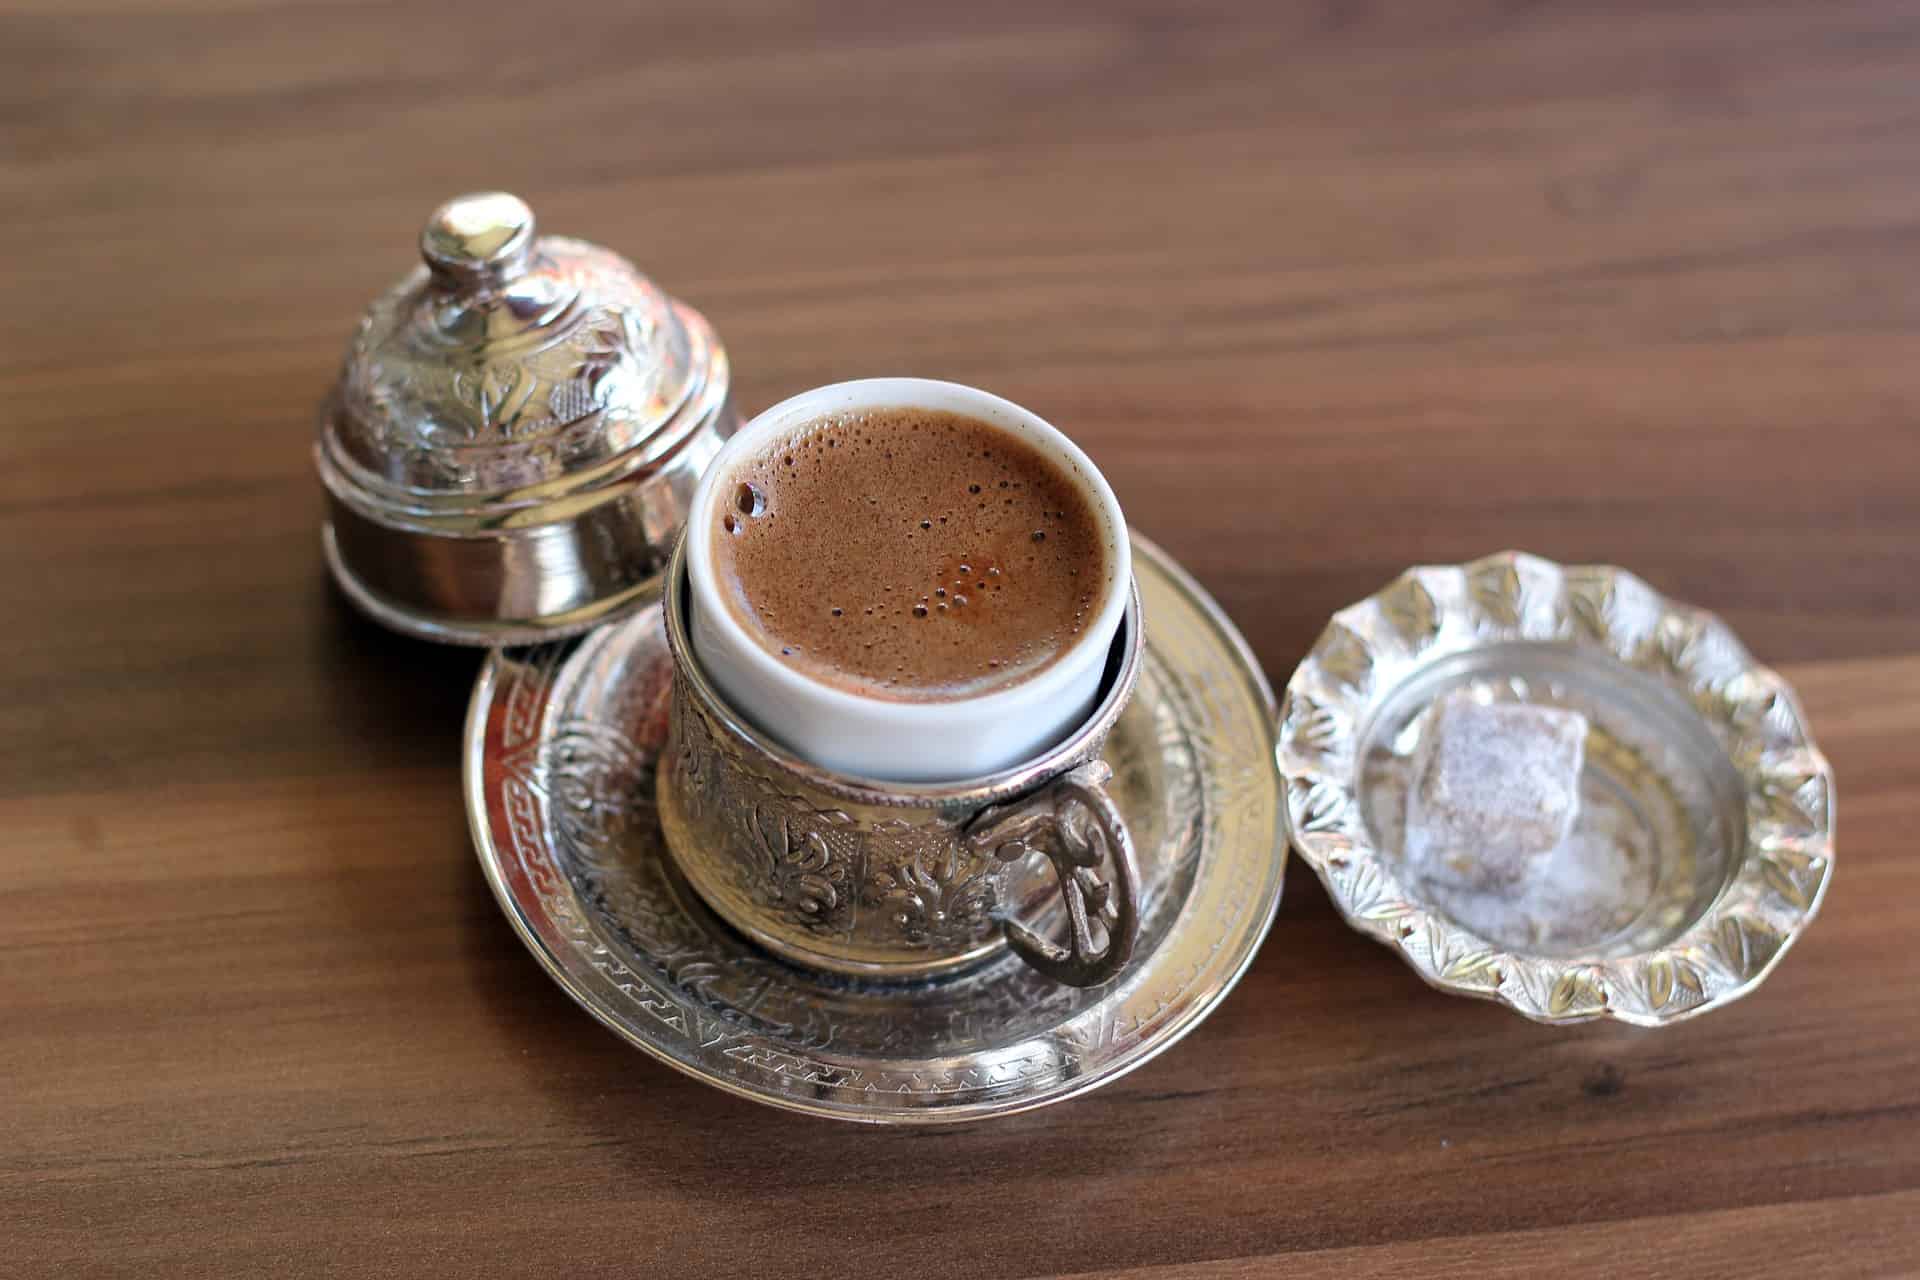 A glass of turkish coffee. Tips and tricks for drinking Turkish coffee.